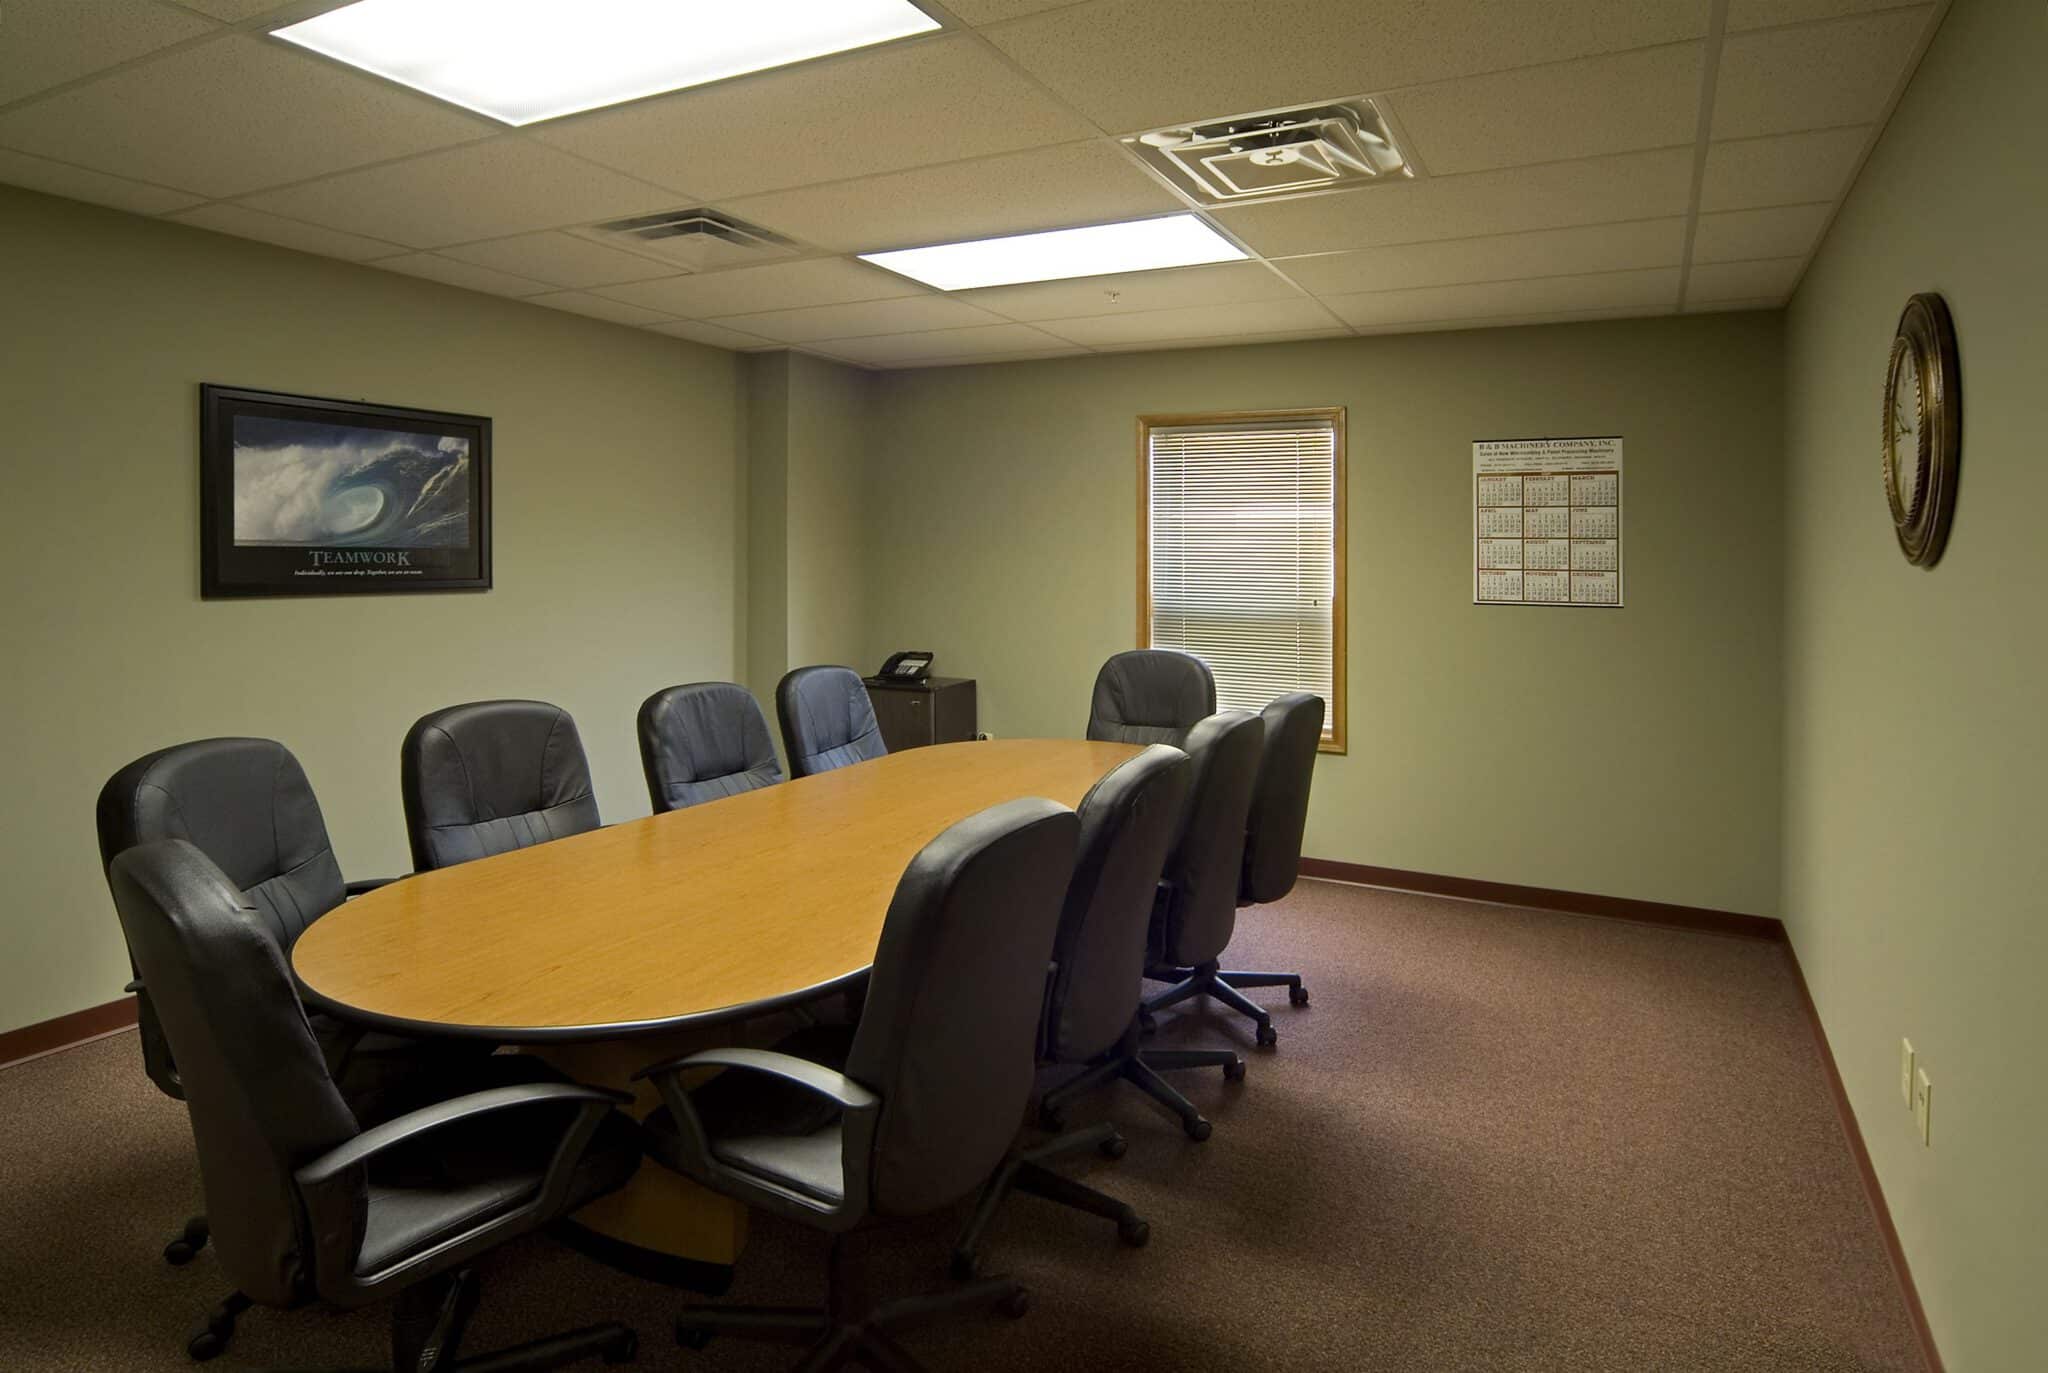 Kountry Wood conference room